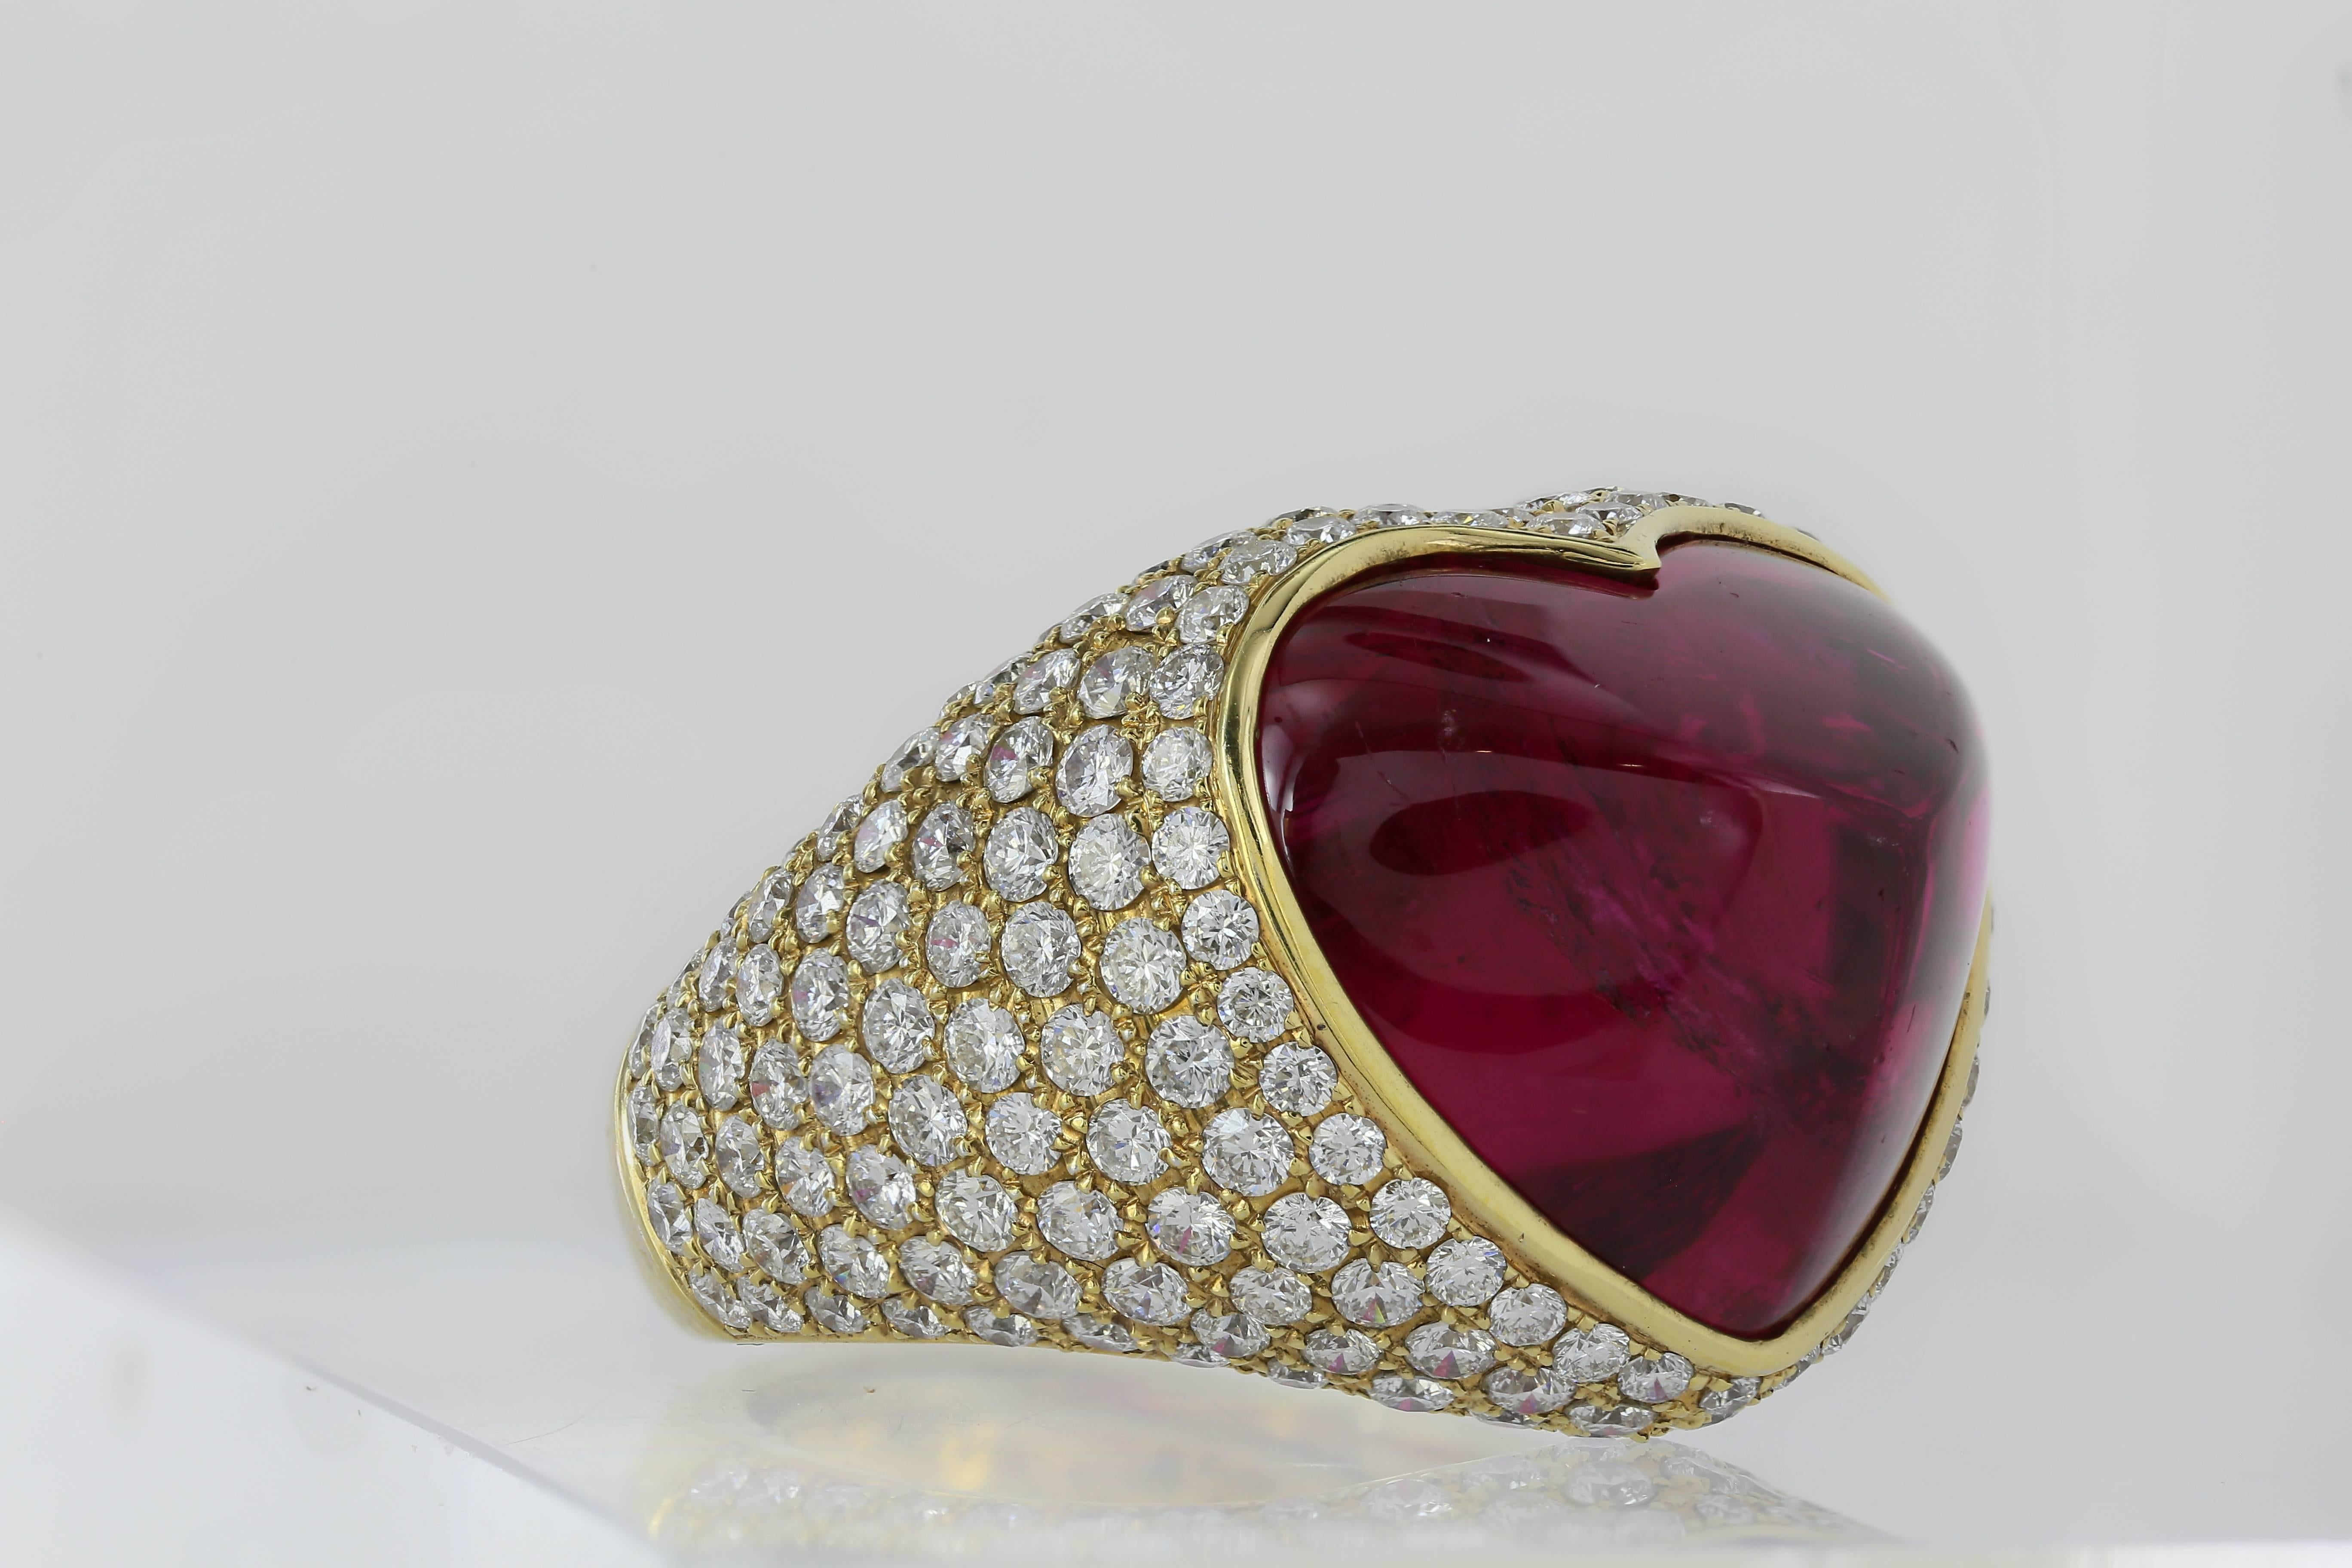 18 karat white gold with yellow gold plating tourmaline and diamond ring, featuring one reddish purple heart shaped sugarloaf tourmaline weighing 17.63 carats surrounded by pave diamonds weighing a total of 3.83 carats and openwork heart shaped